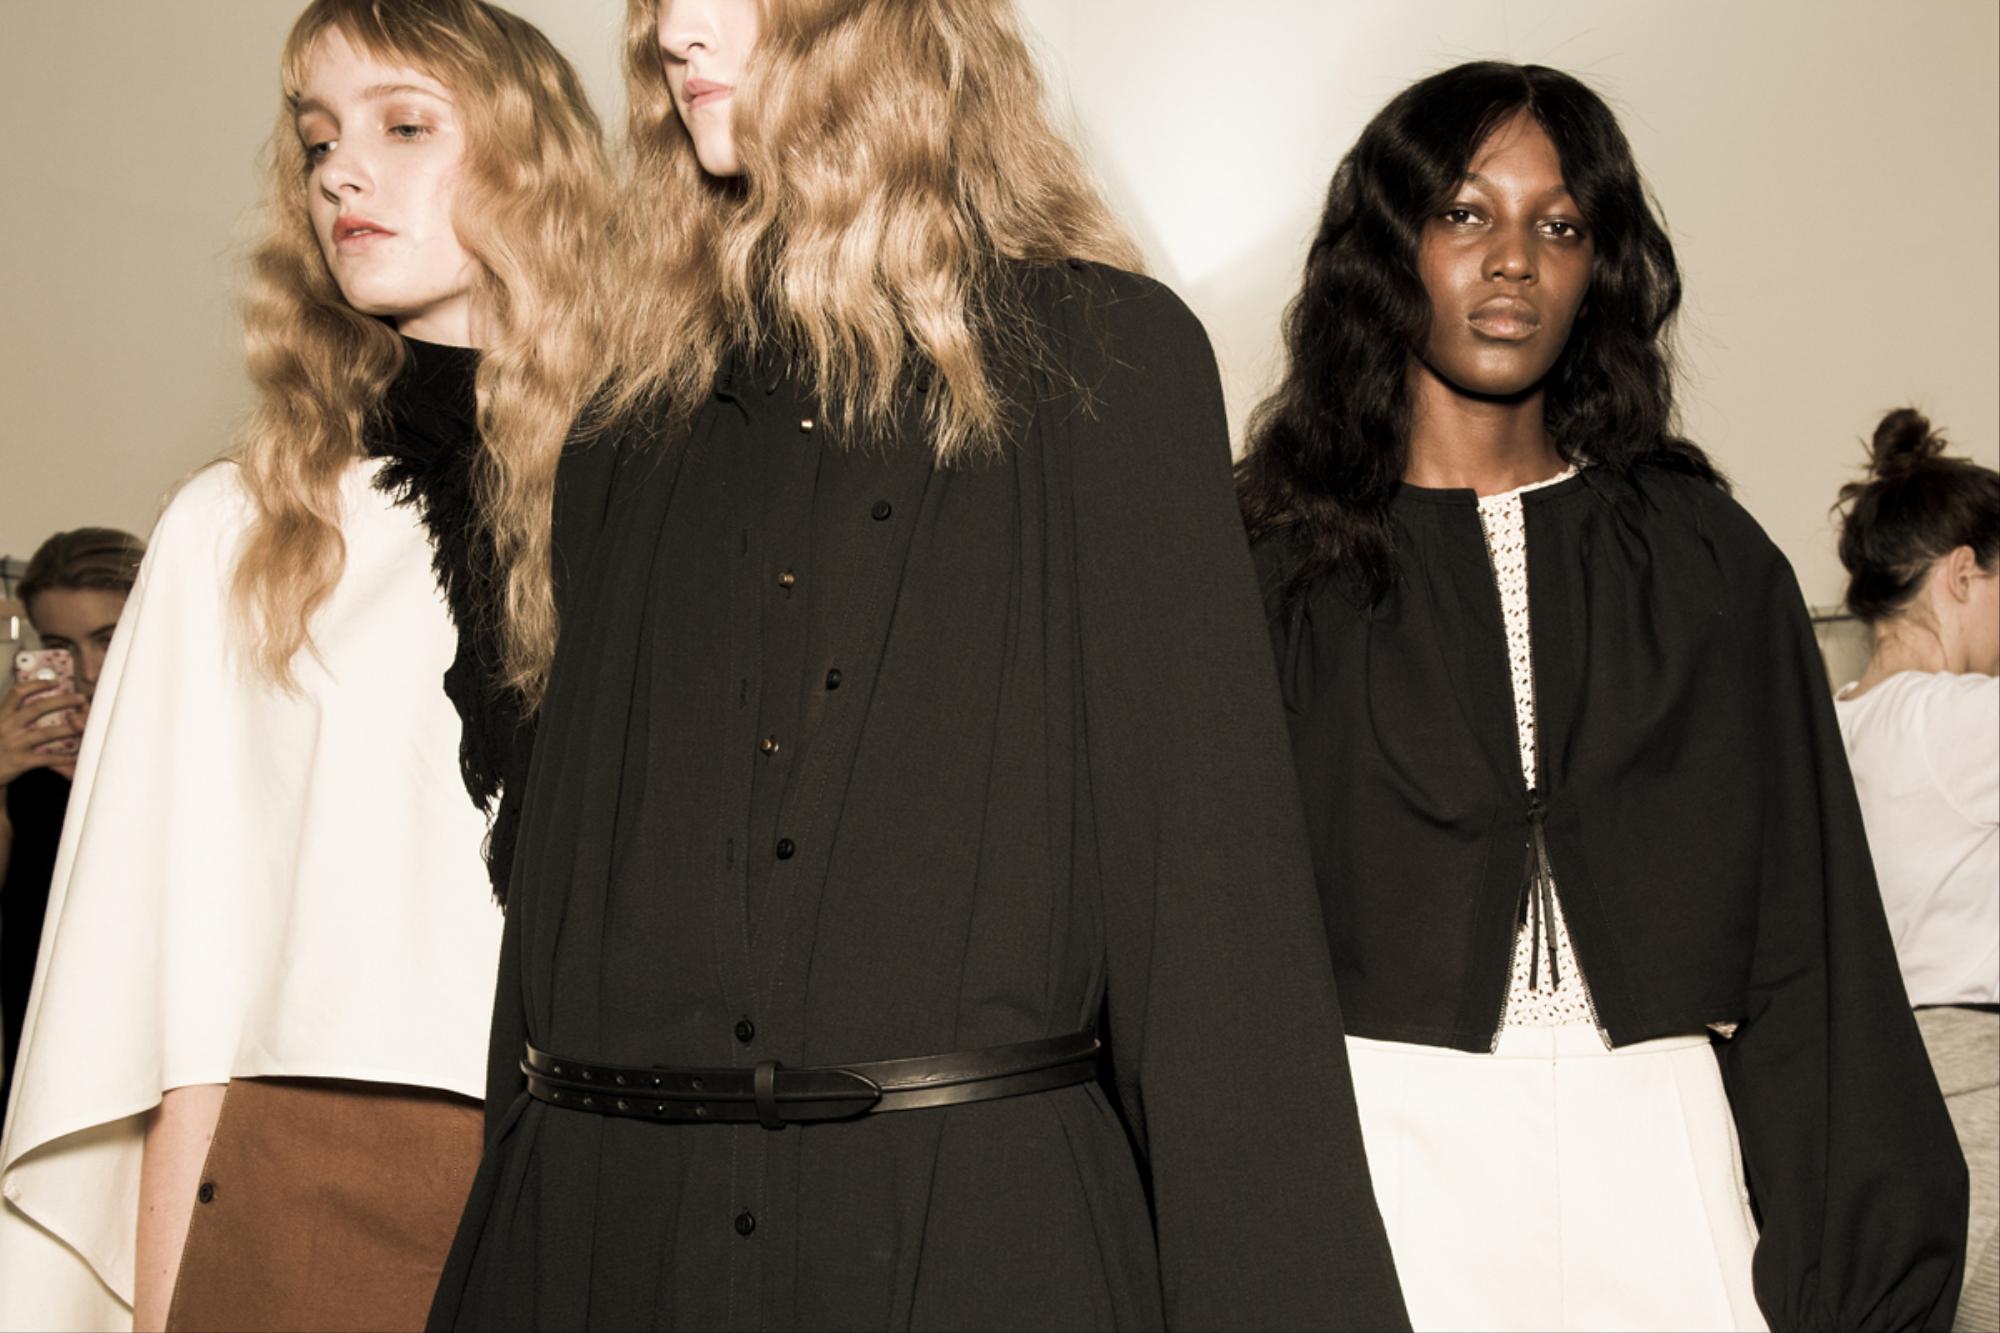 lemaire's restrained beauty for spring/summer 16 | look | i-D